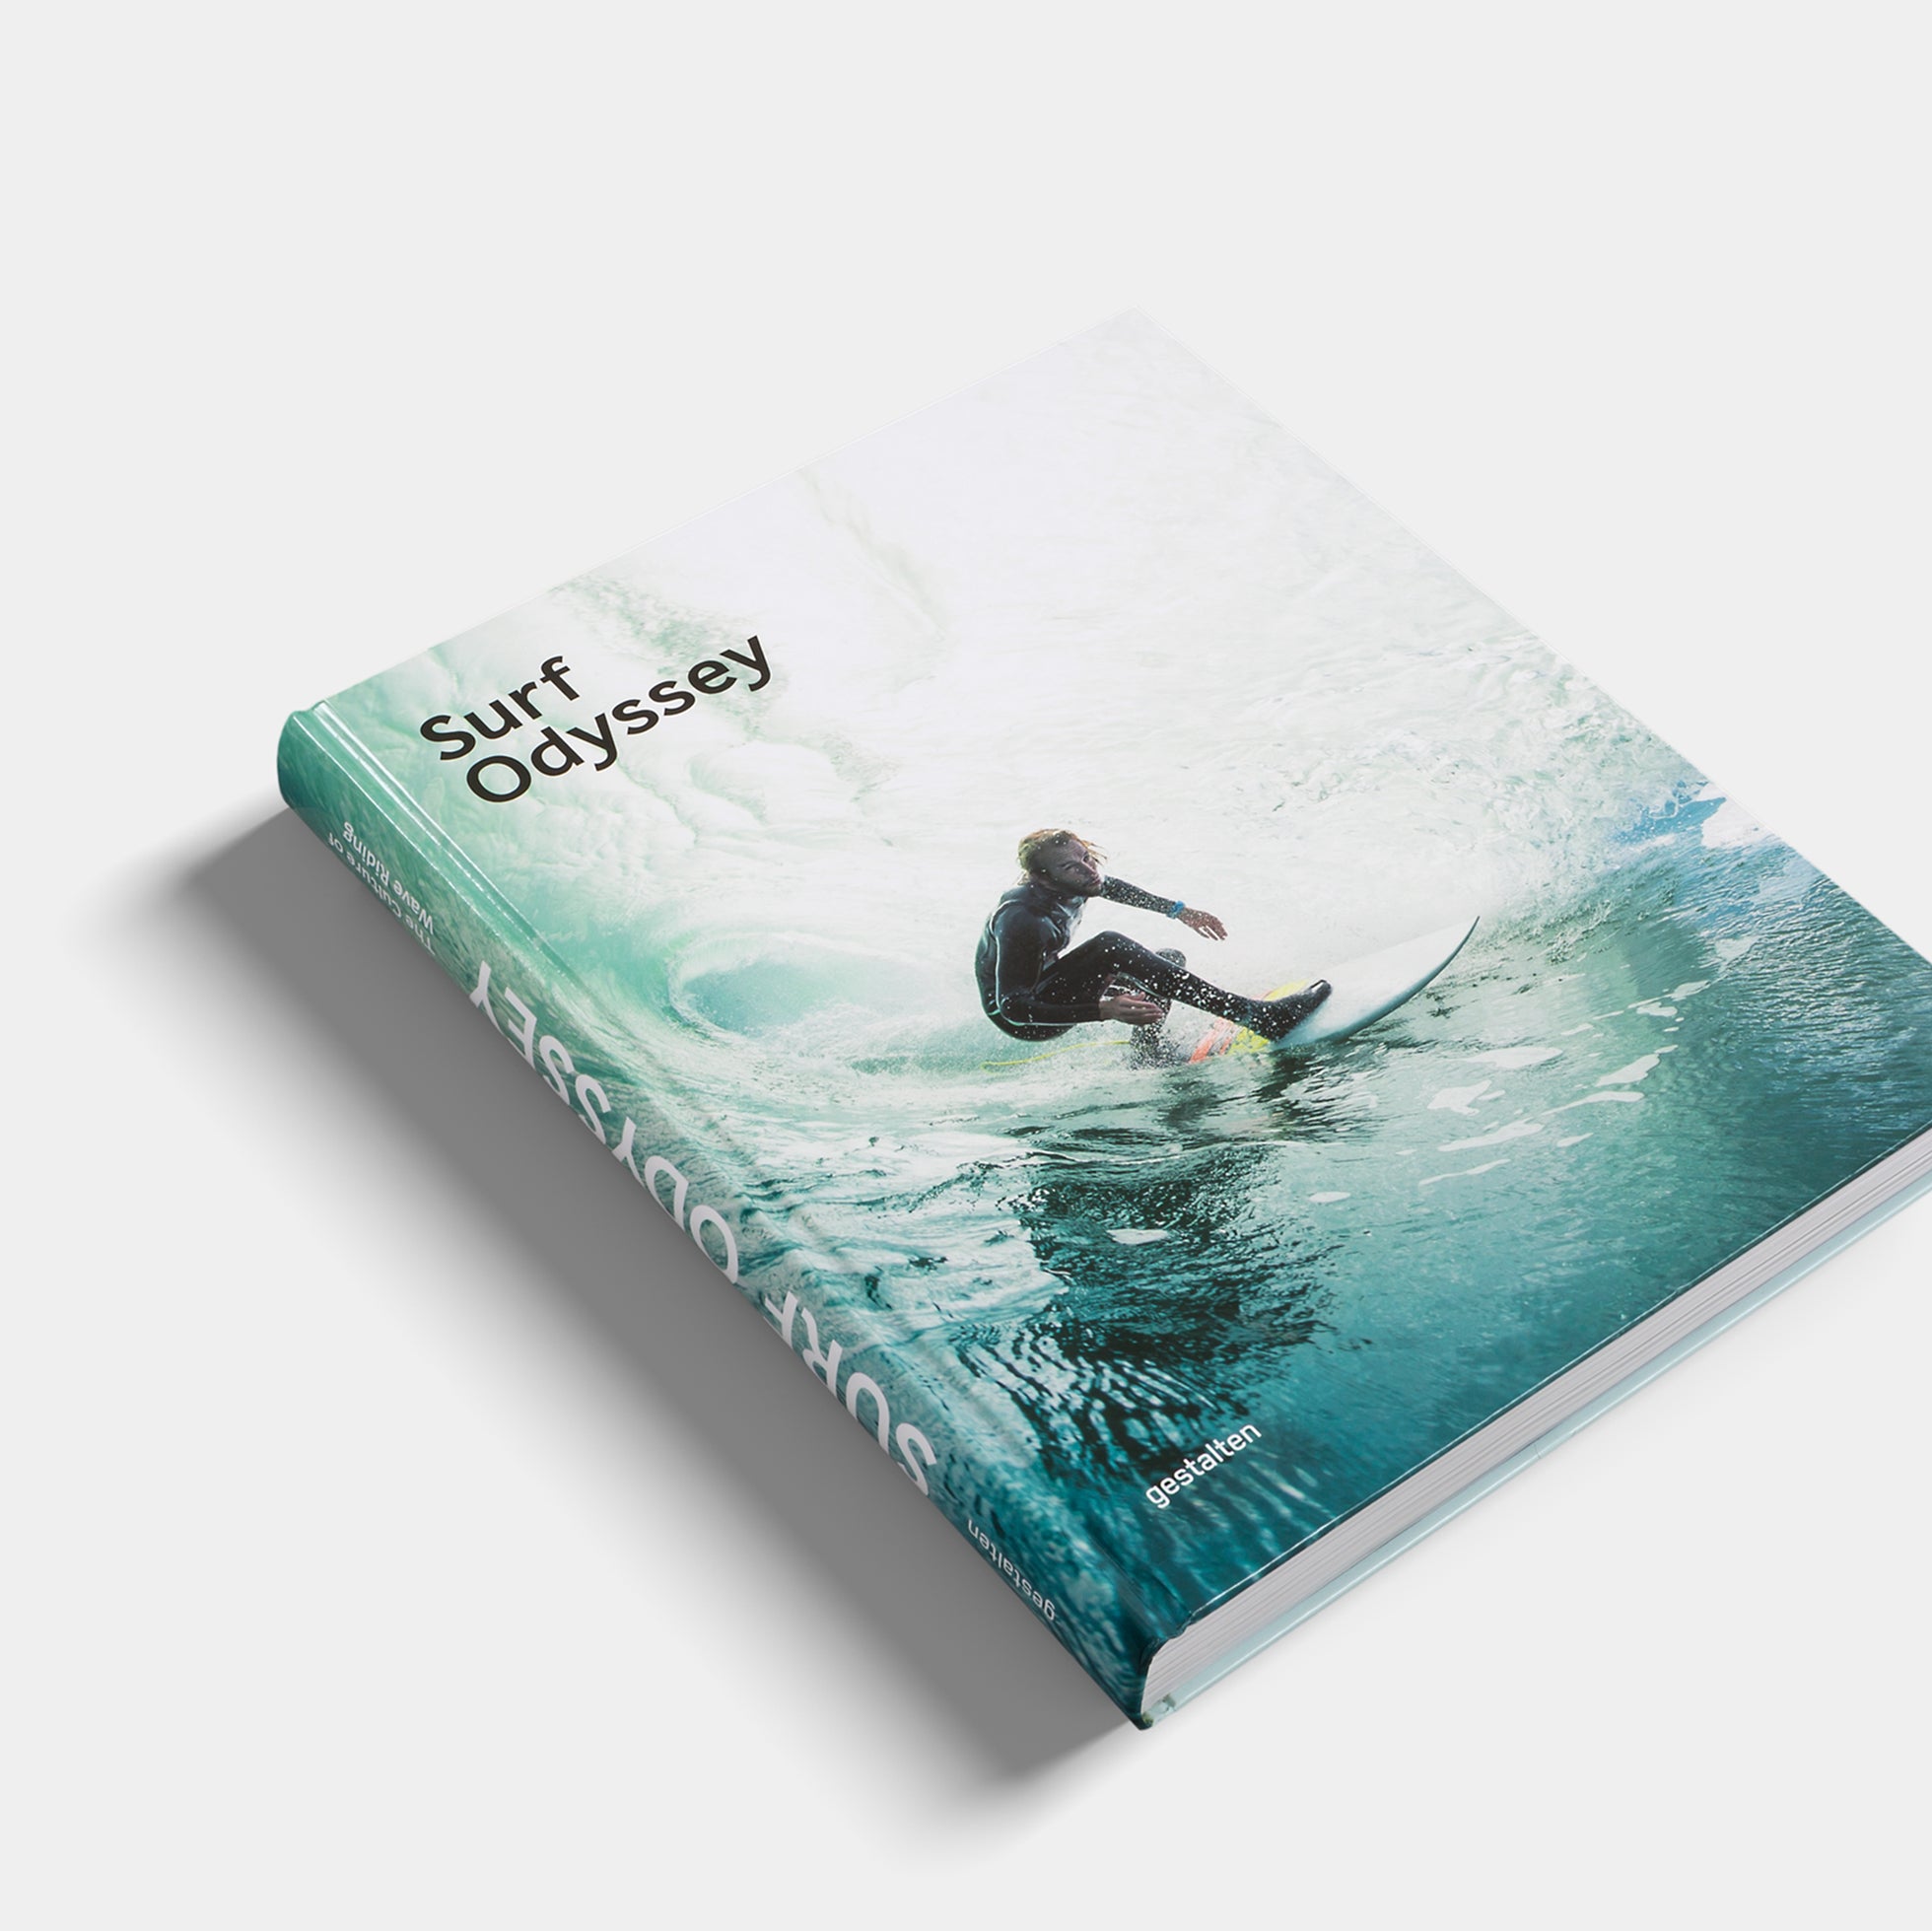 Surf Odyssey, The Culture of wave riding